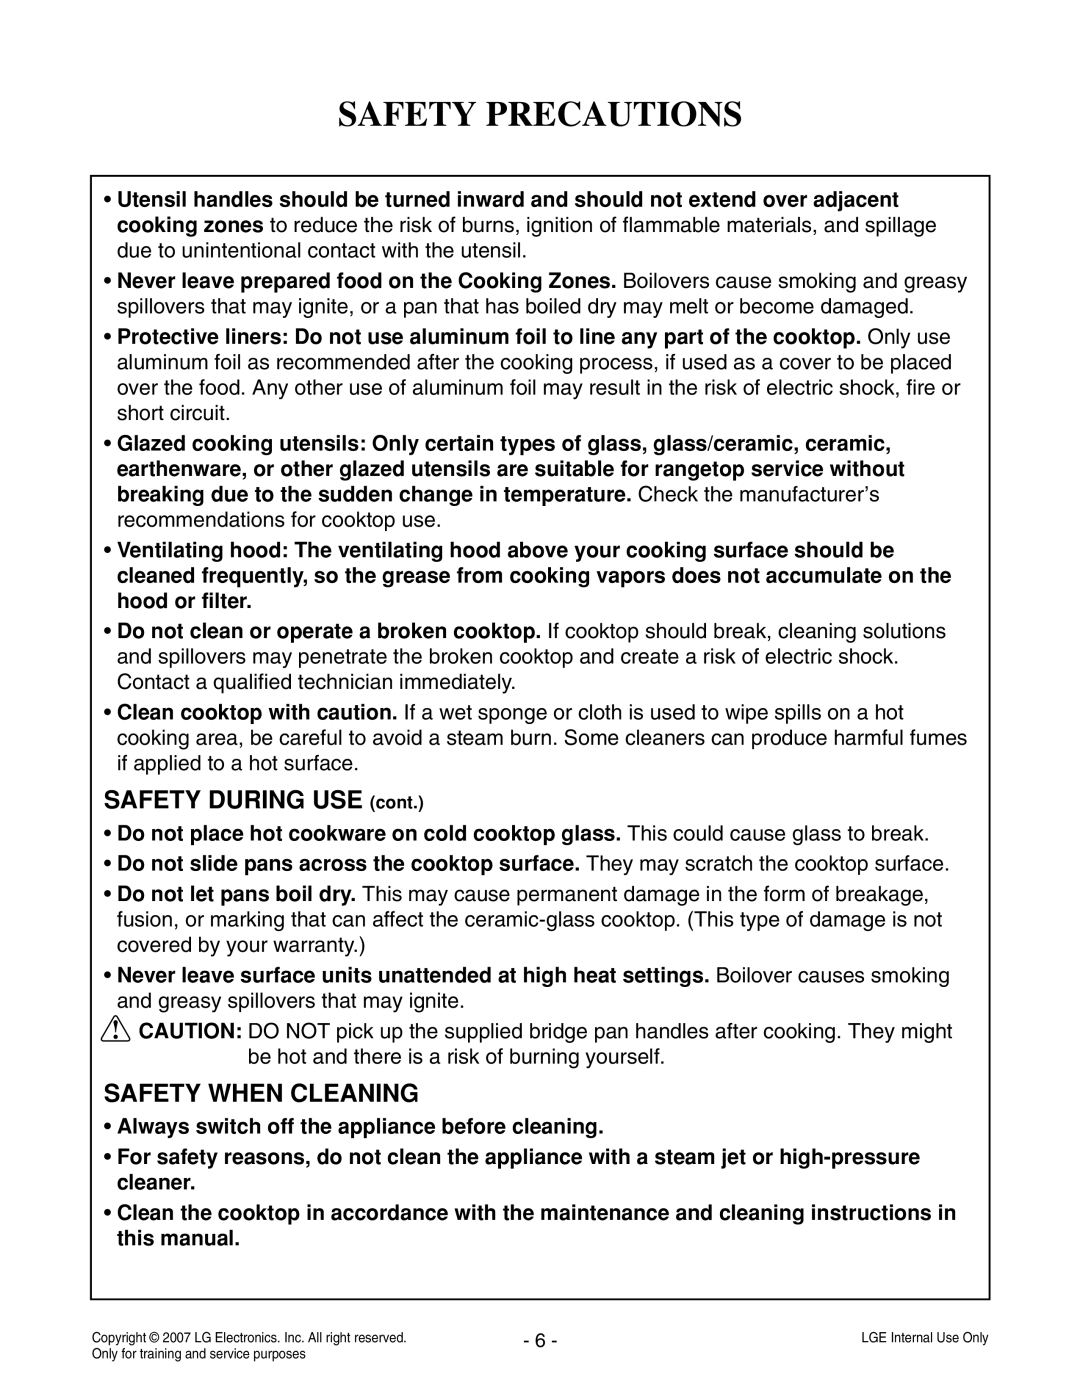 LG Electronics LCE30845 service manual Safety Precautions, SAFETY DURING USE cont, Safety When Cleaning 